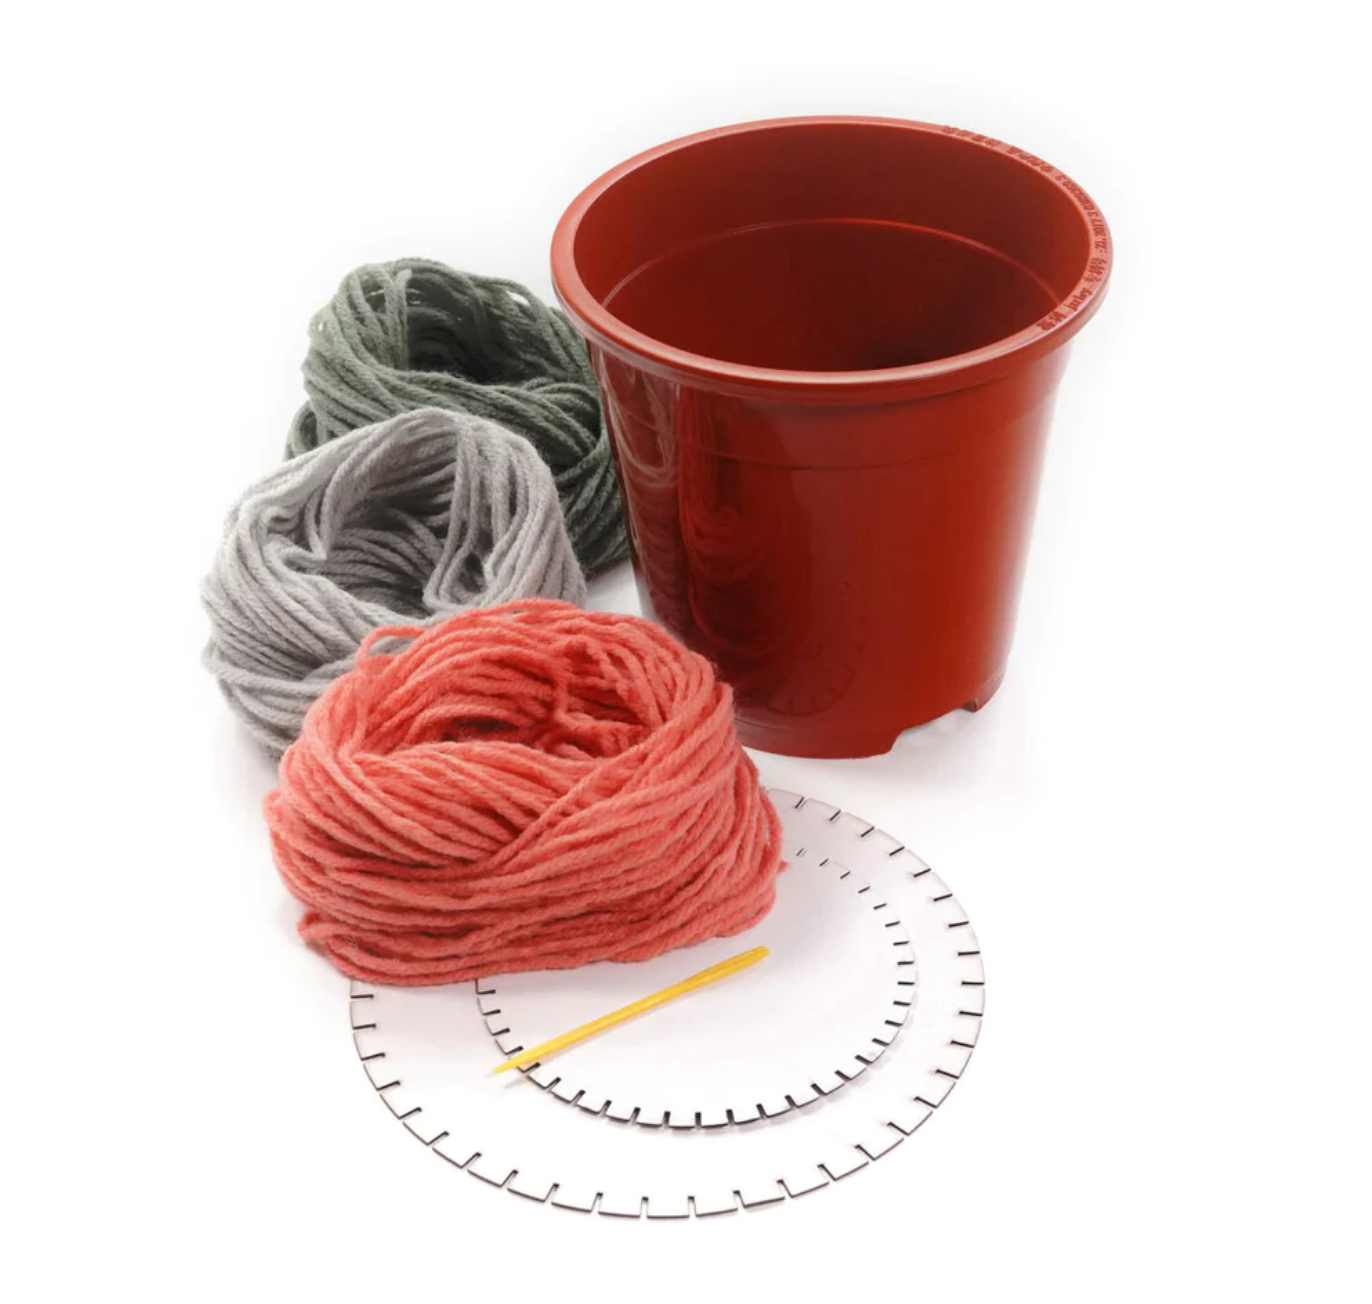 Knit your own plant cover kit